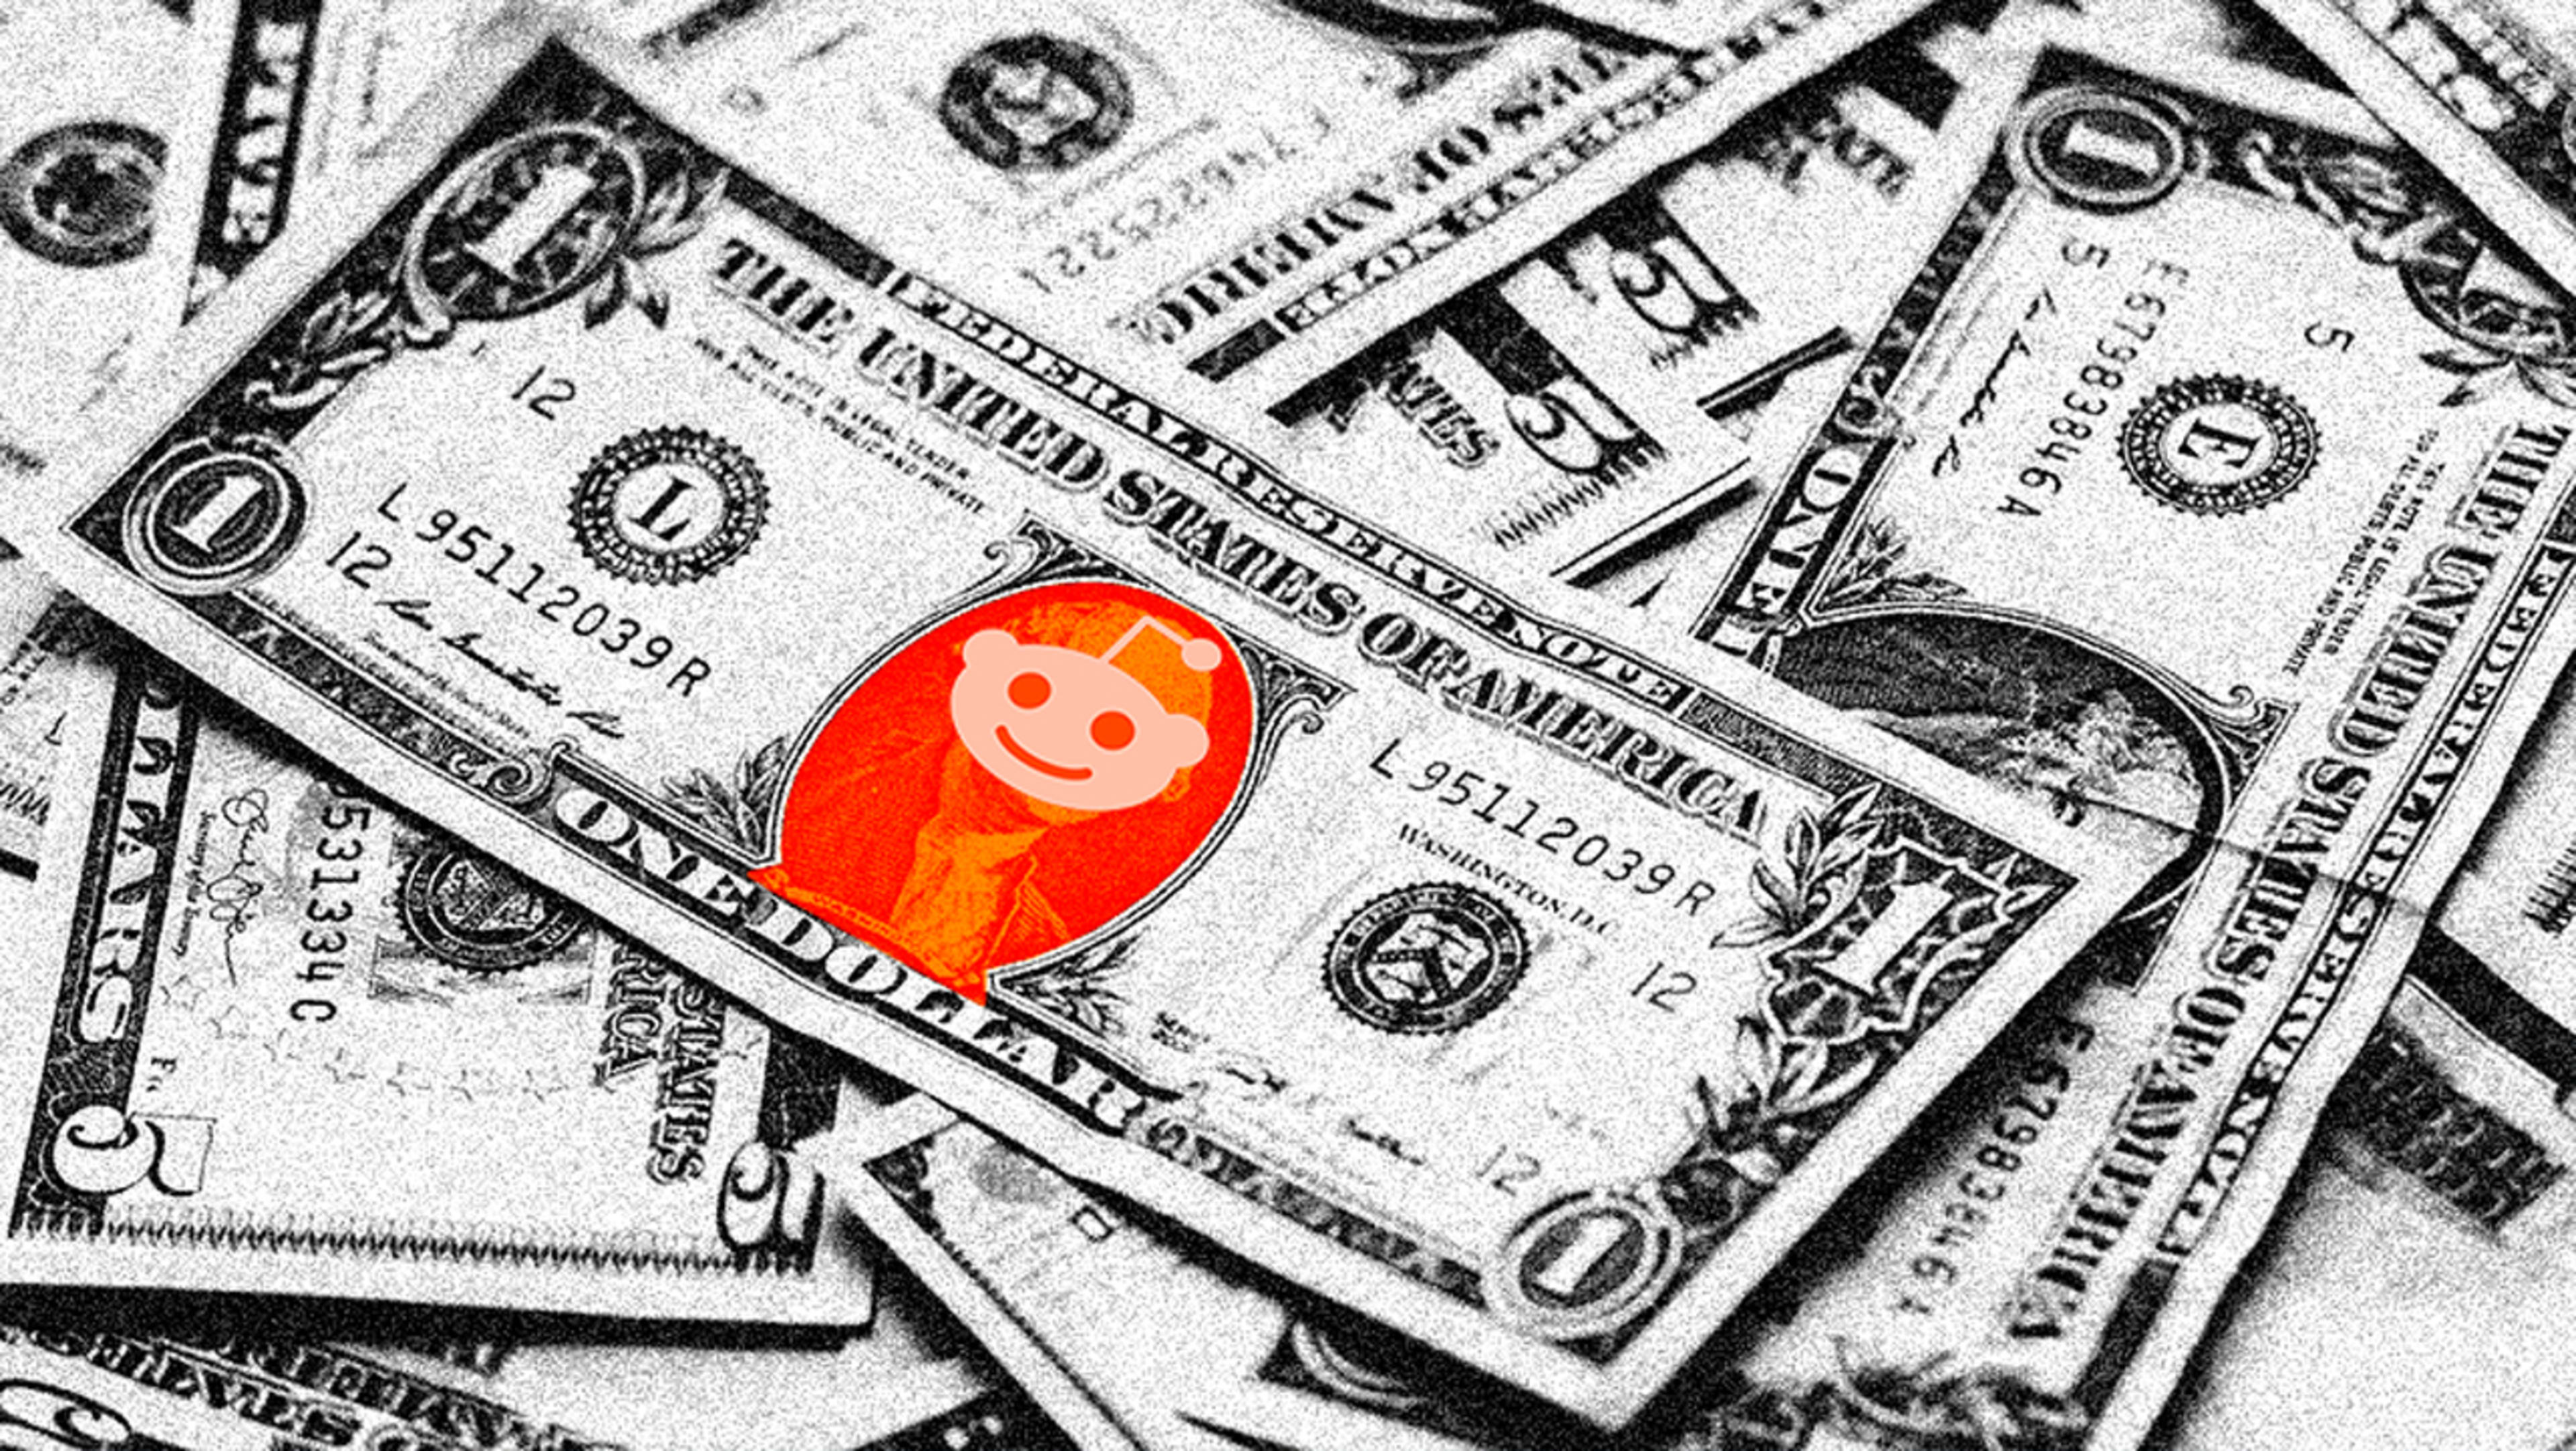 Reddit’s move to put its API behind a paywall could shift how AI is trained